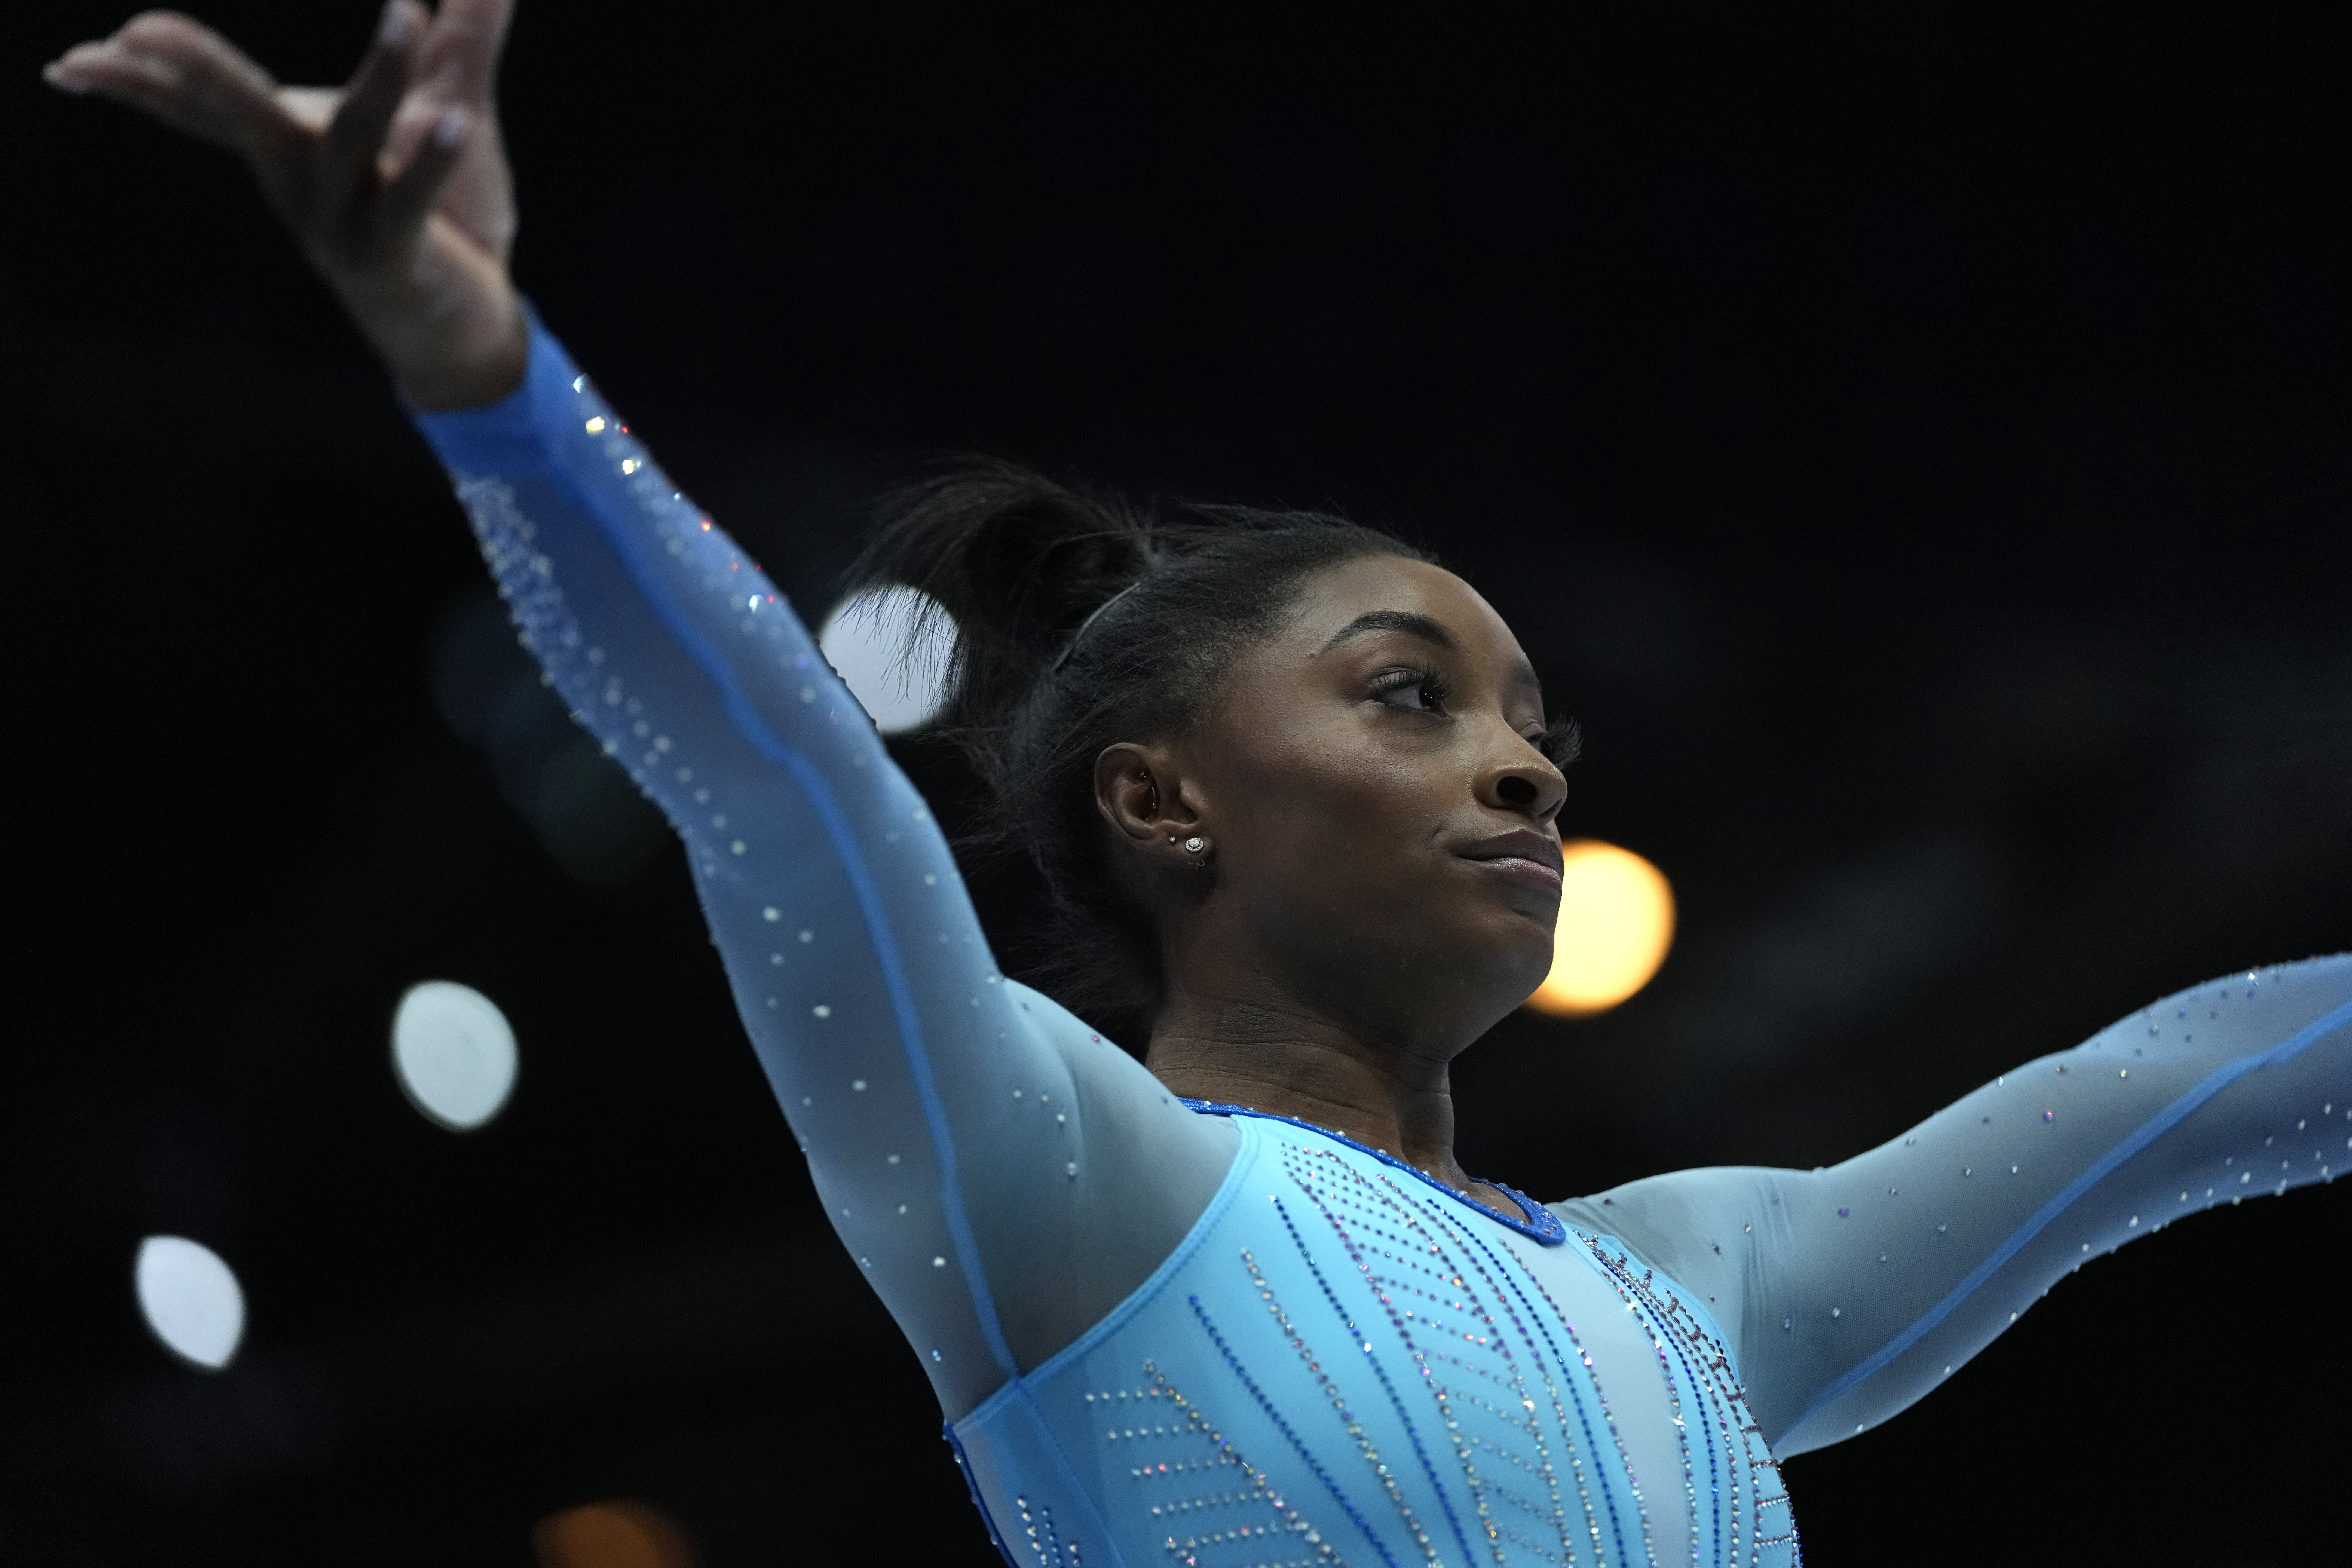 Simone Biles becomes the most decorated gymnast in history - CBS News